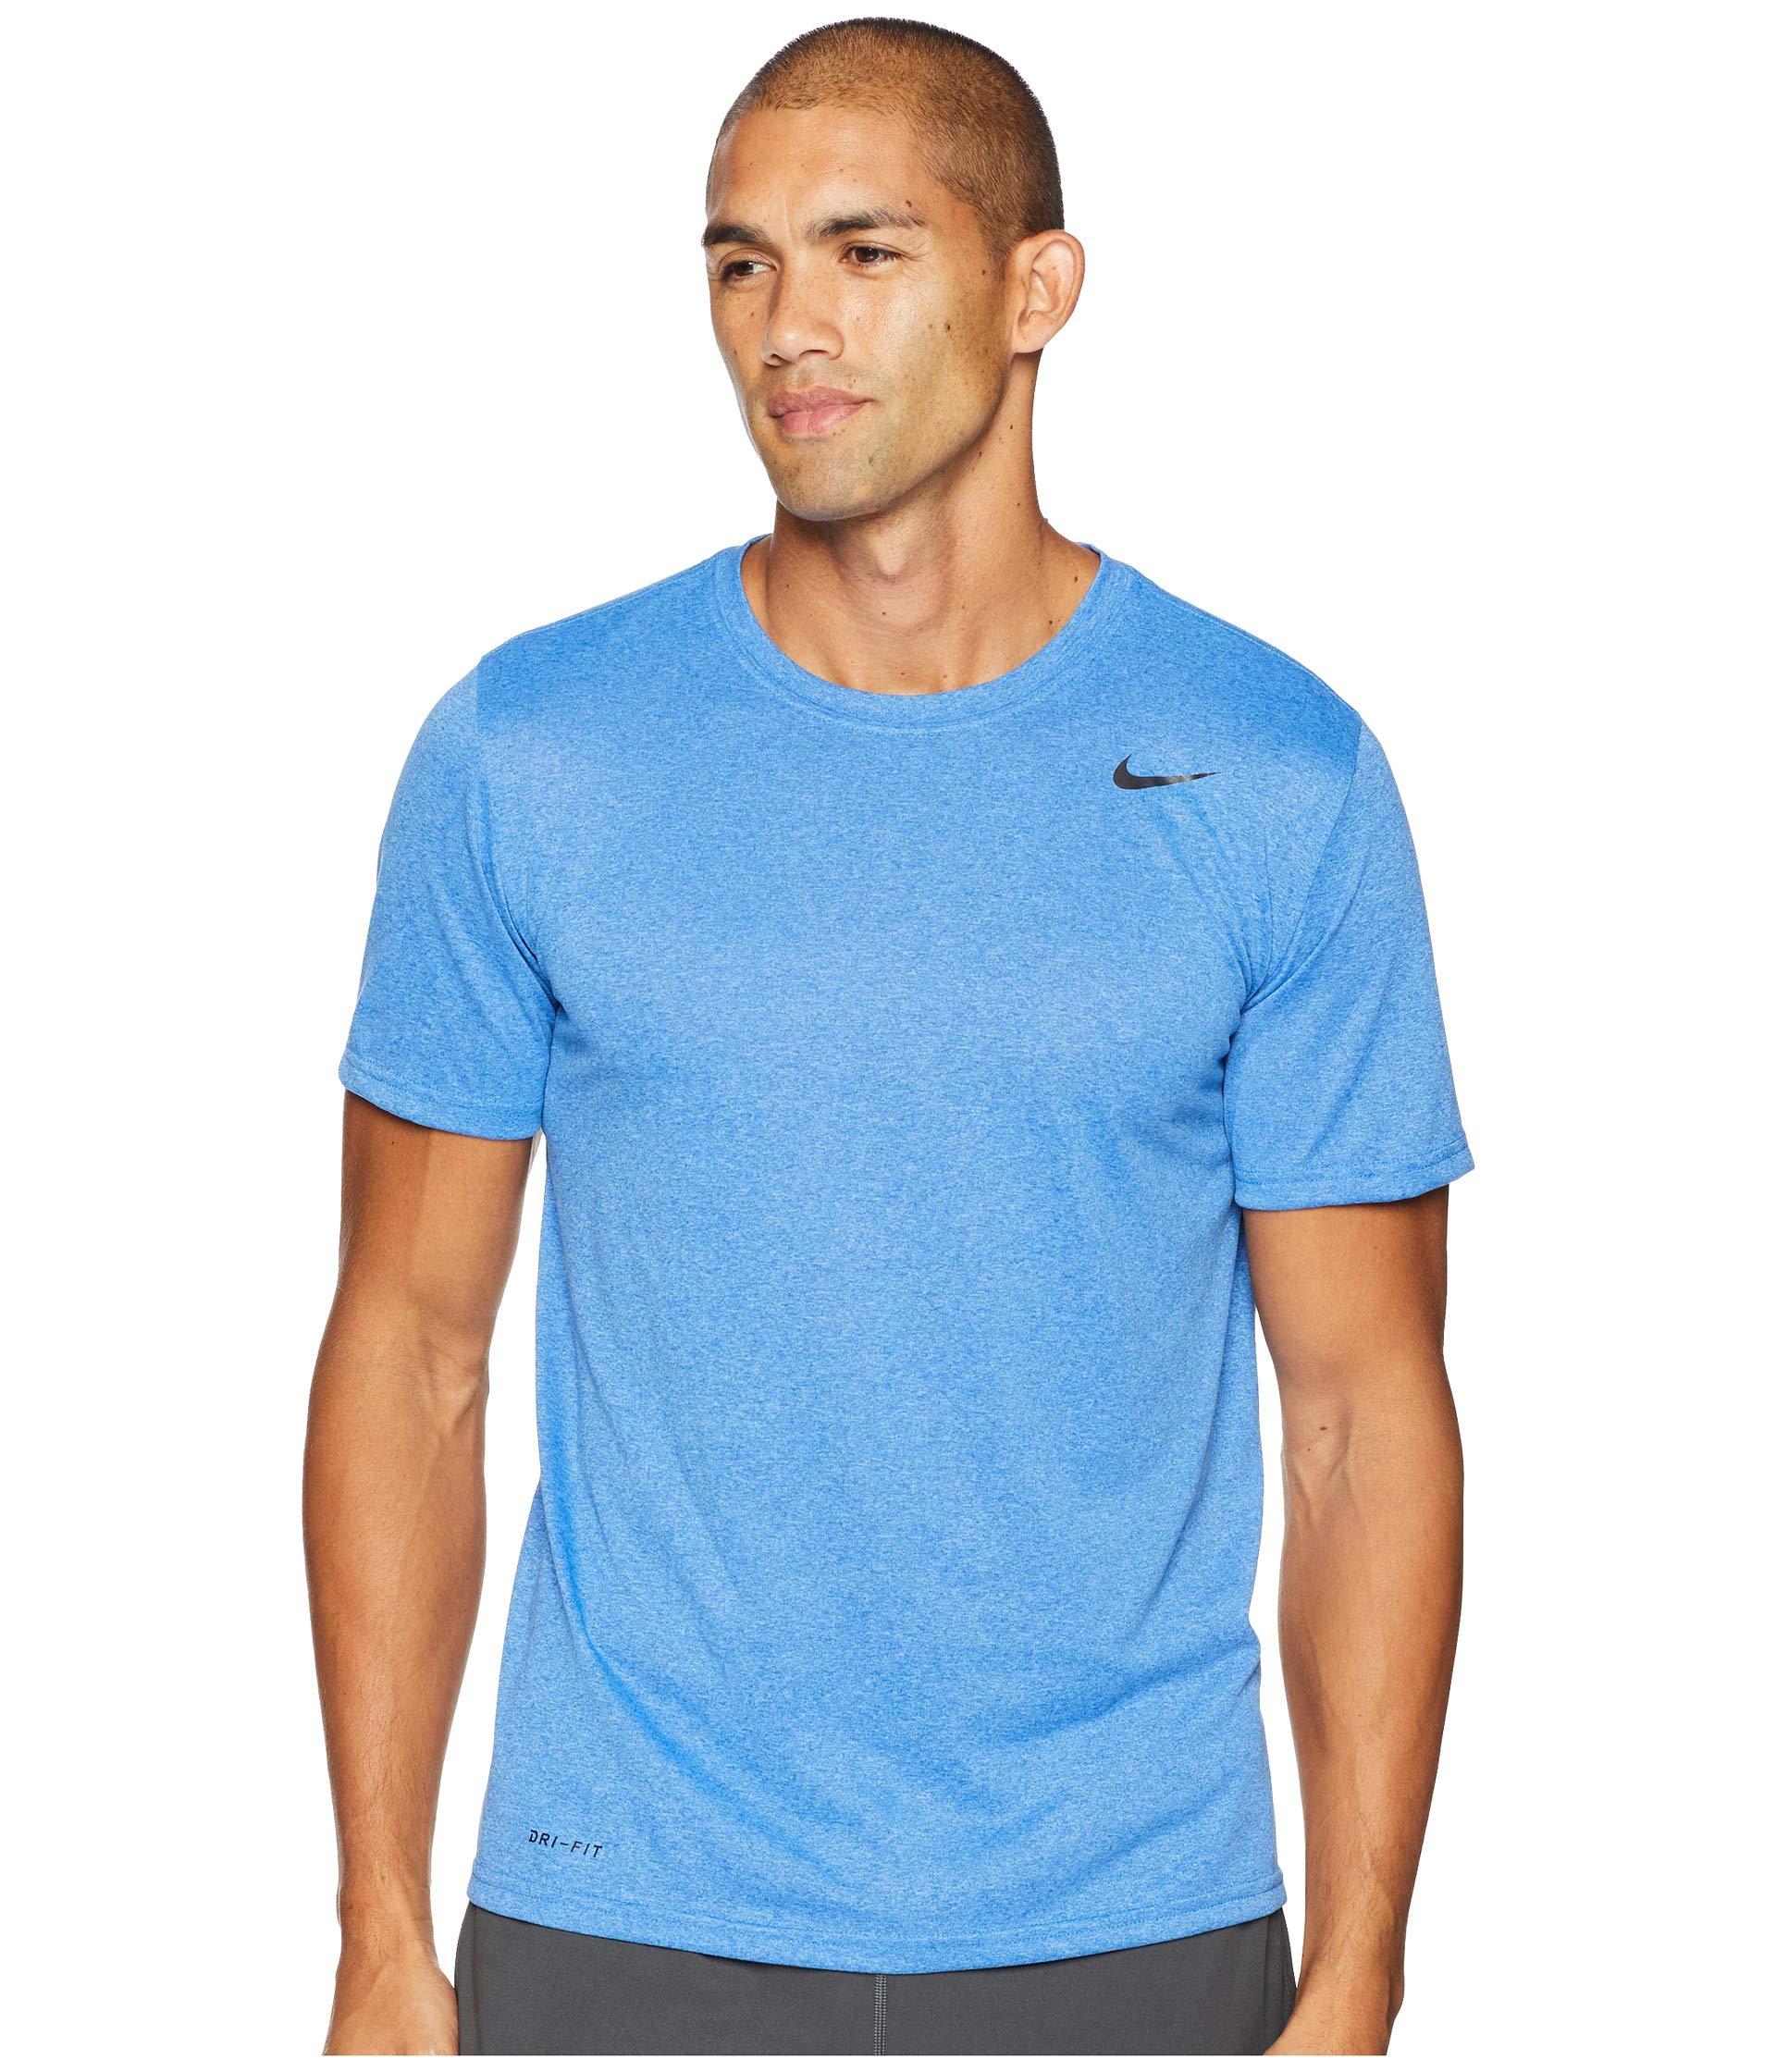 Nike Synthetic Legend 2.0 Short Sleeve Tee in Blue for Men - Lyst